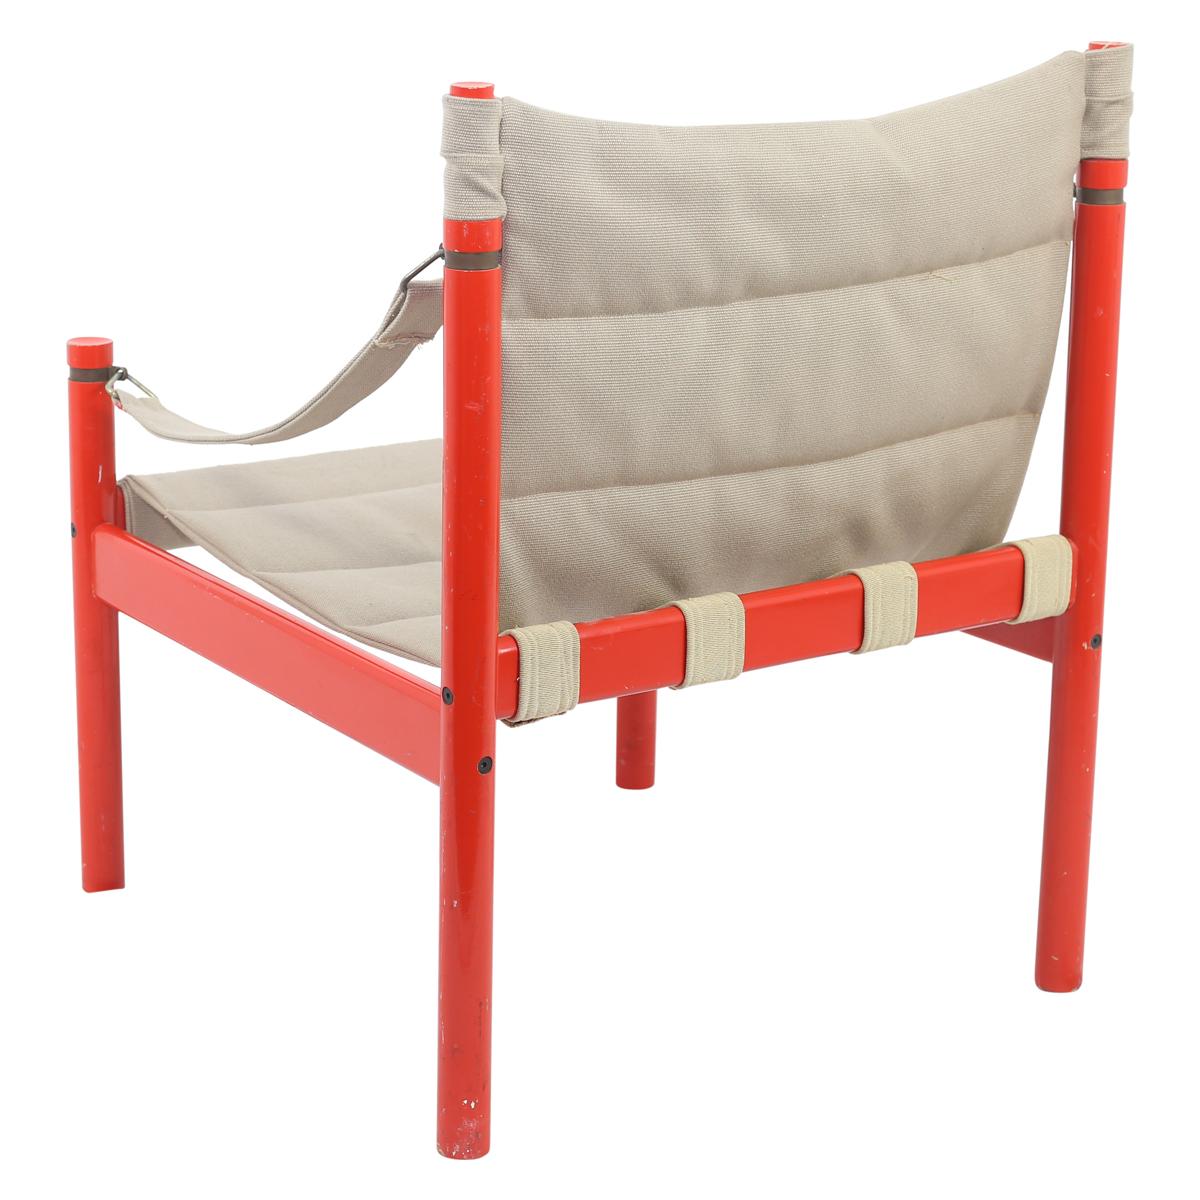 Mid-20th Century Scandinavian Safari Chair with Red Hi Gloss Wood Painted Frame